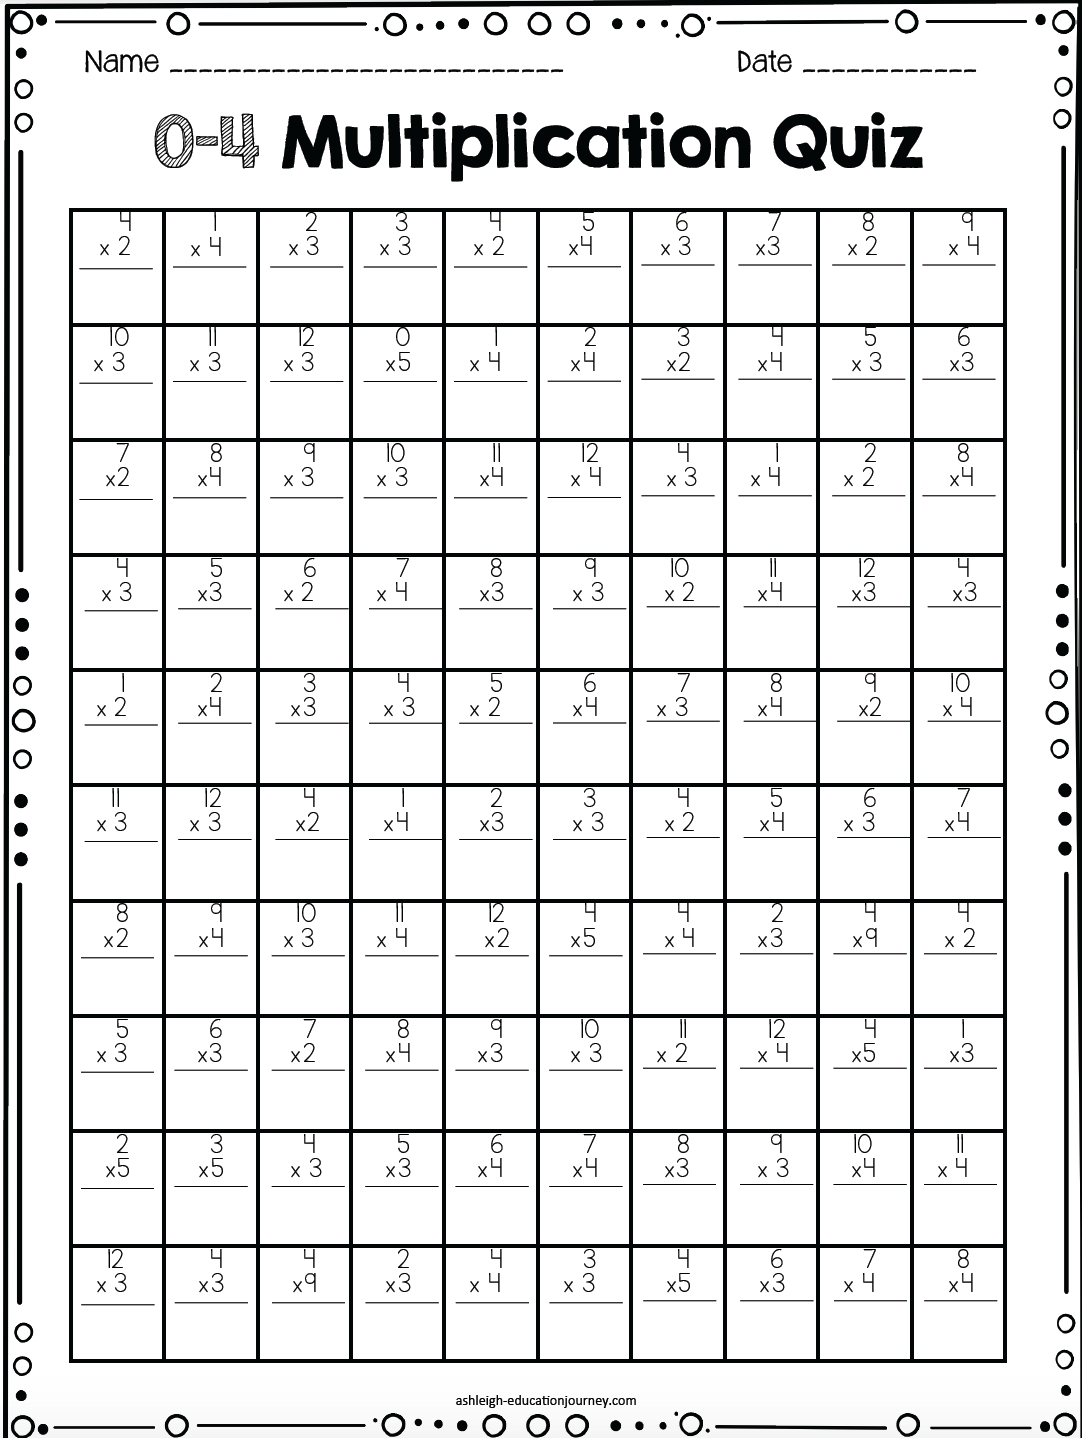 Multiplication Facts For Upper Elementary Students | Class | Math - Free Printable Multiplication Speed Drills